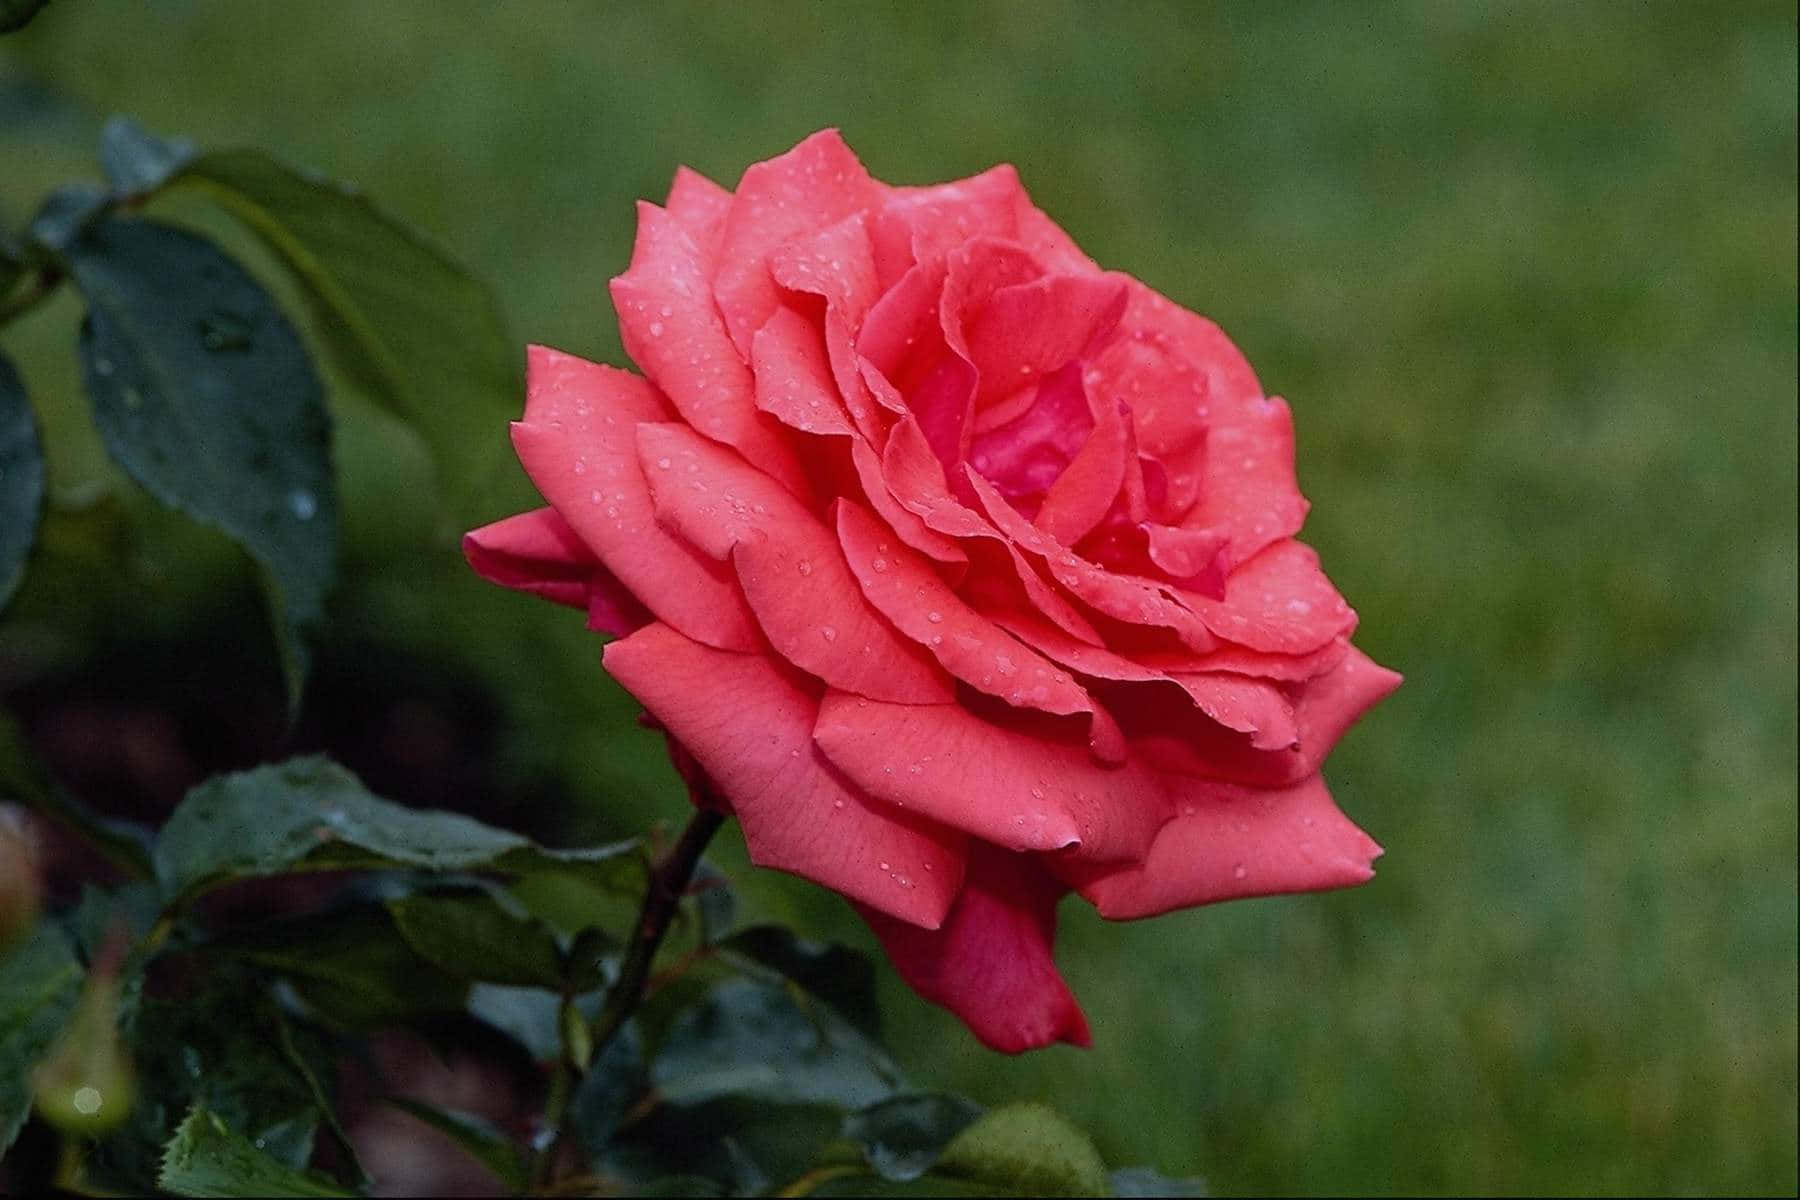 A beautiful pink rose in full bloom.